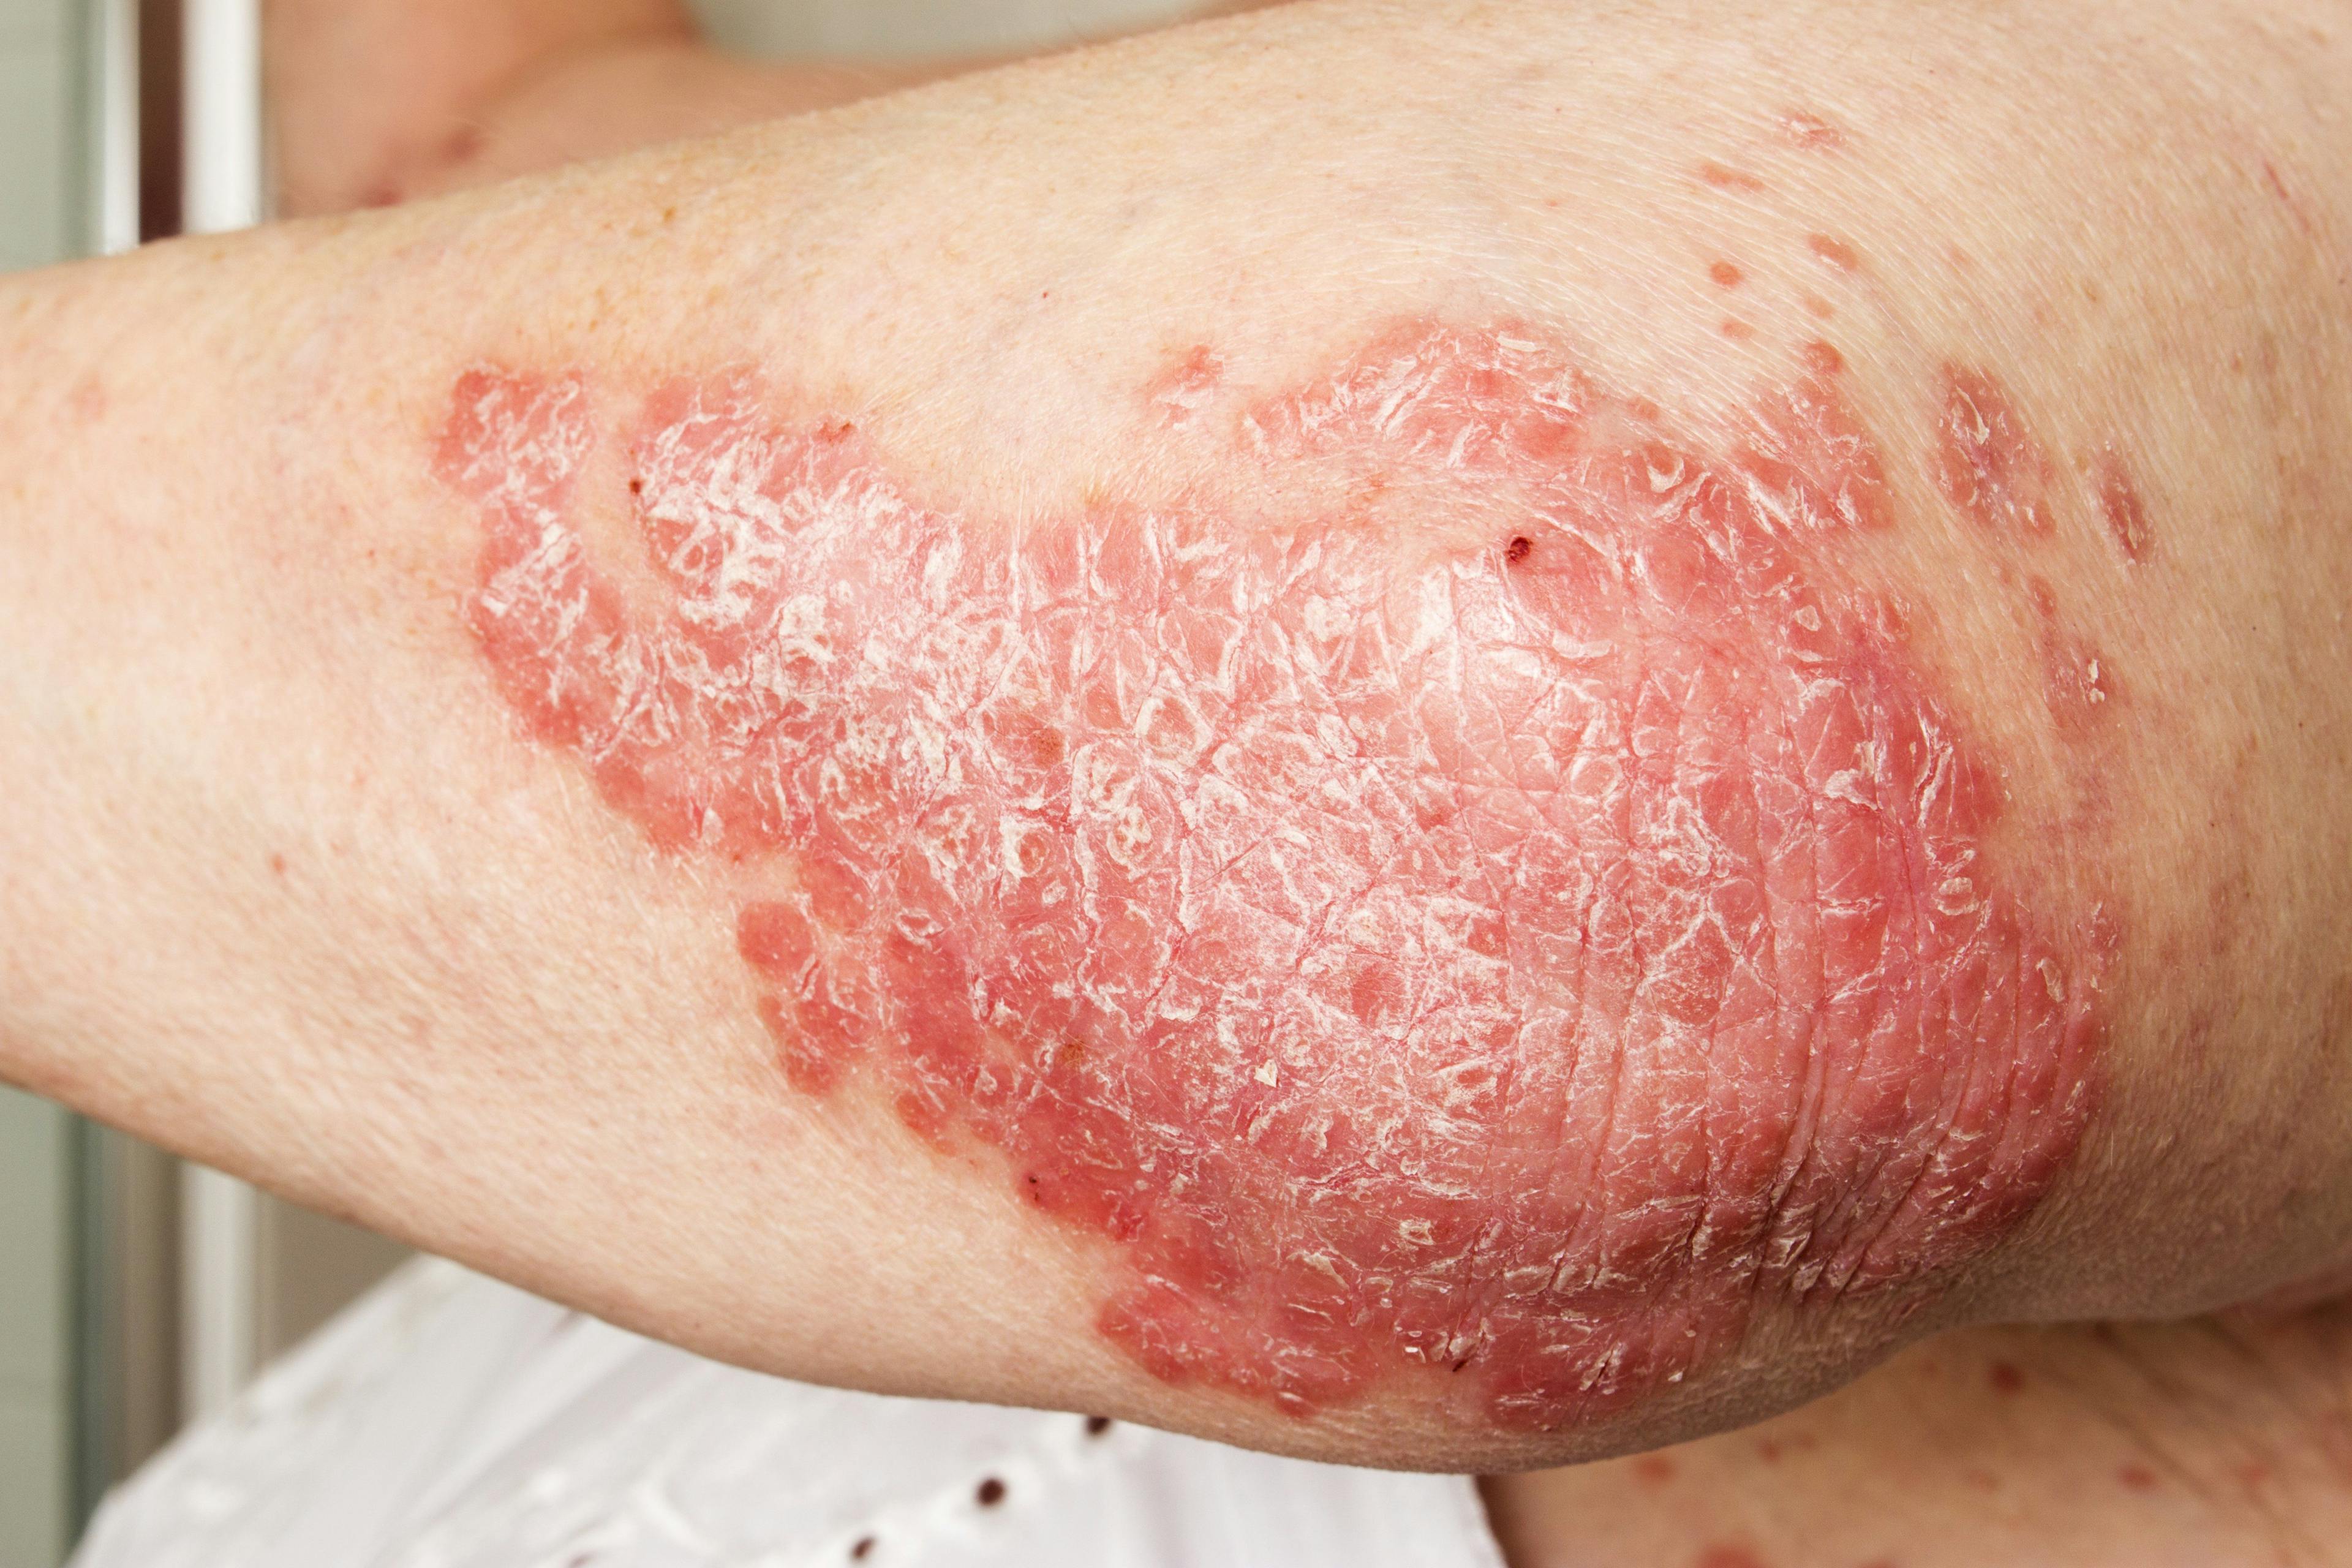 Treatment protocols may differ in early and late onset psoriasis